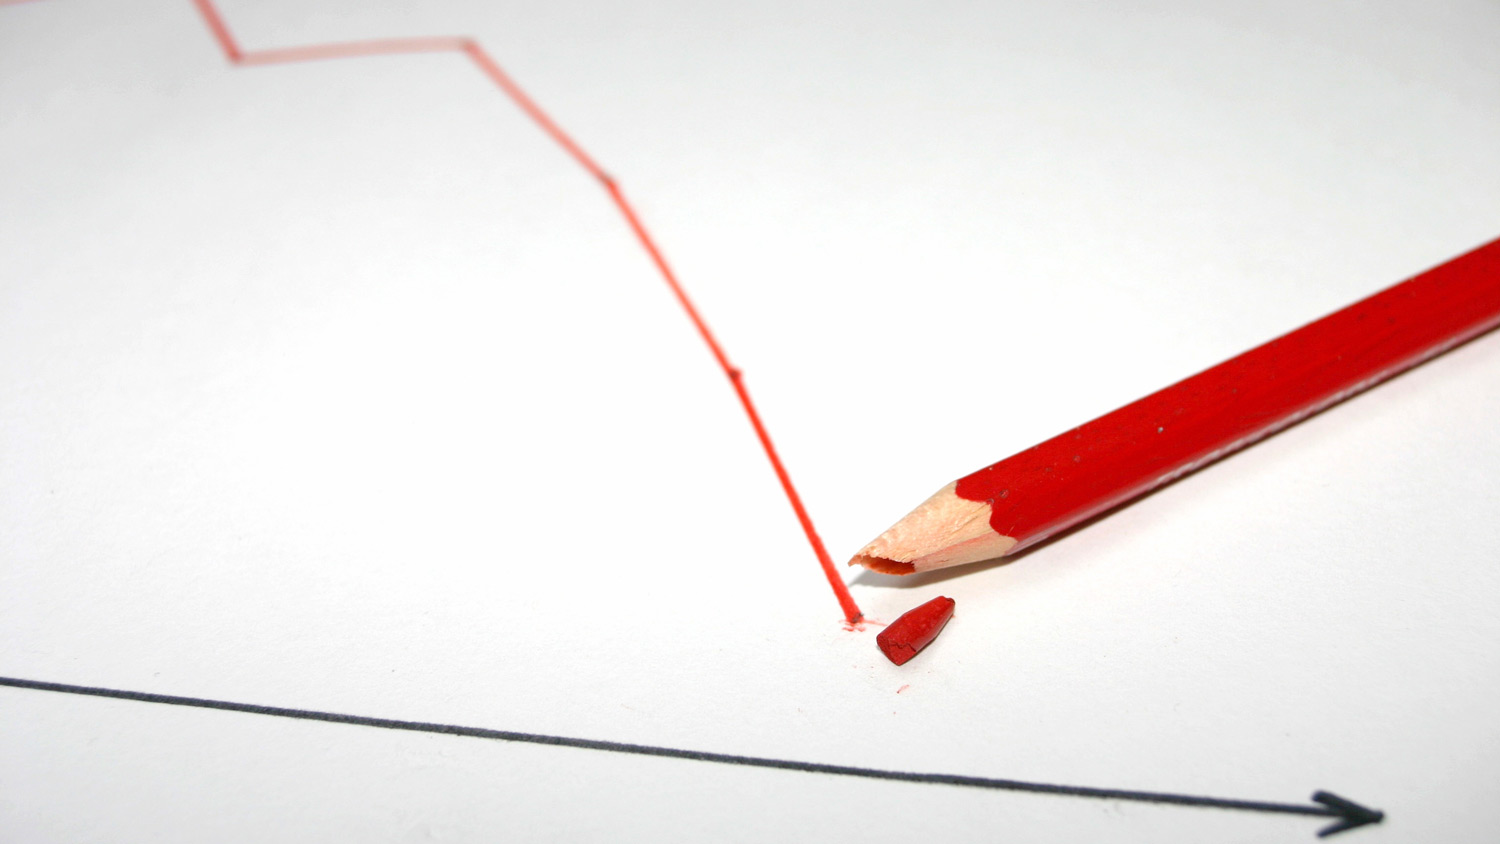 A graph showing a downturn in red pencil